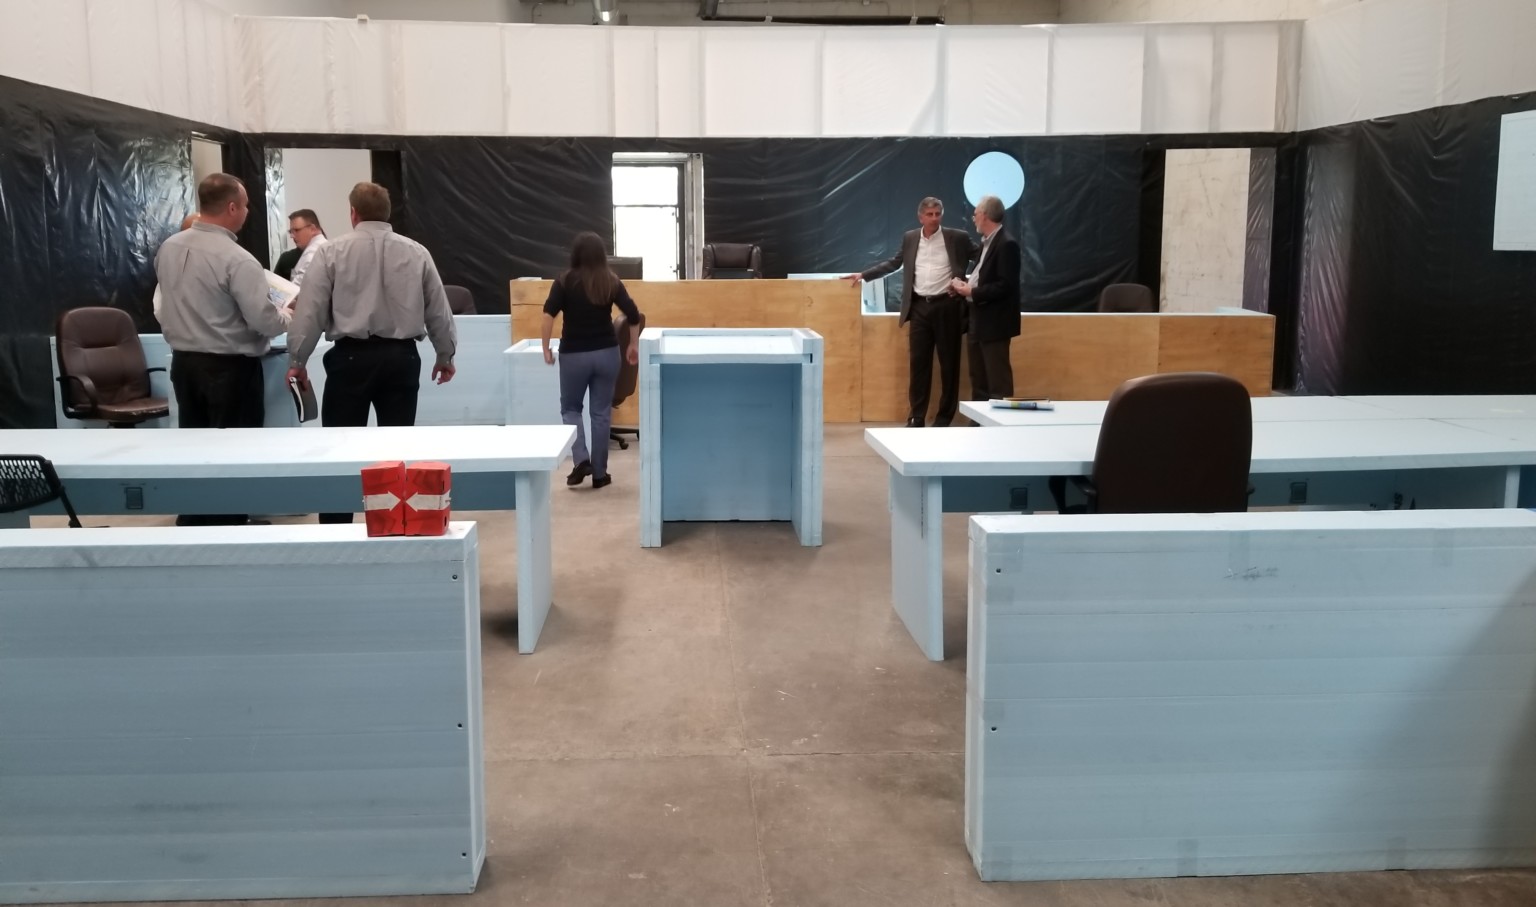 functional mockup of courtroom with people studying the space